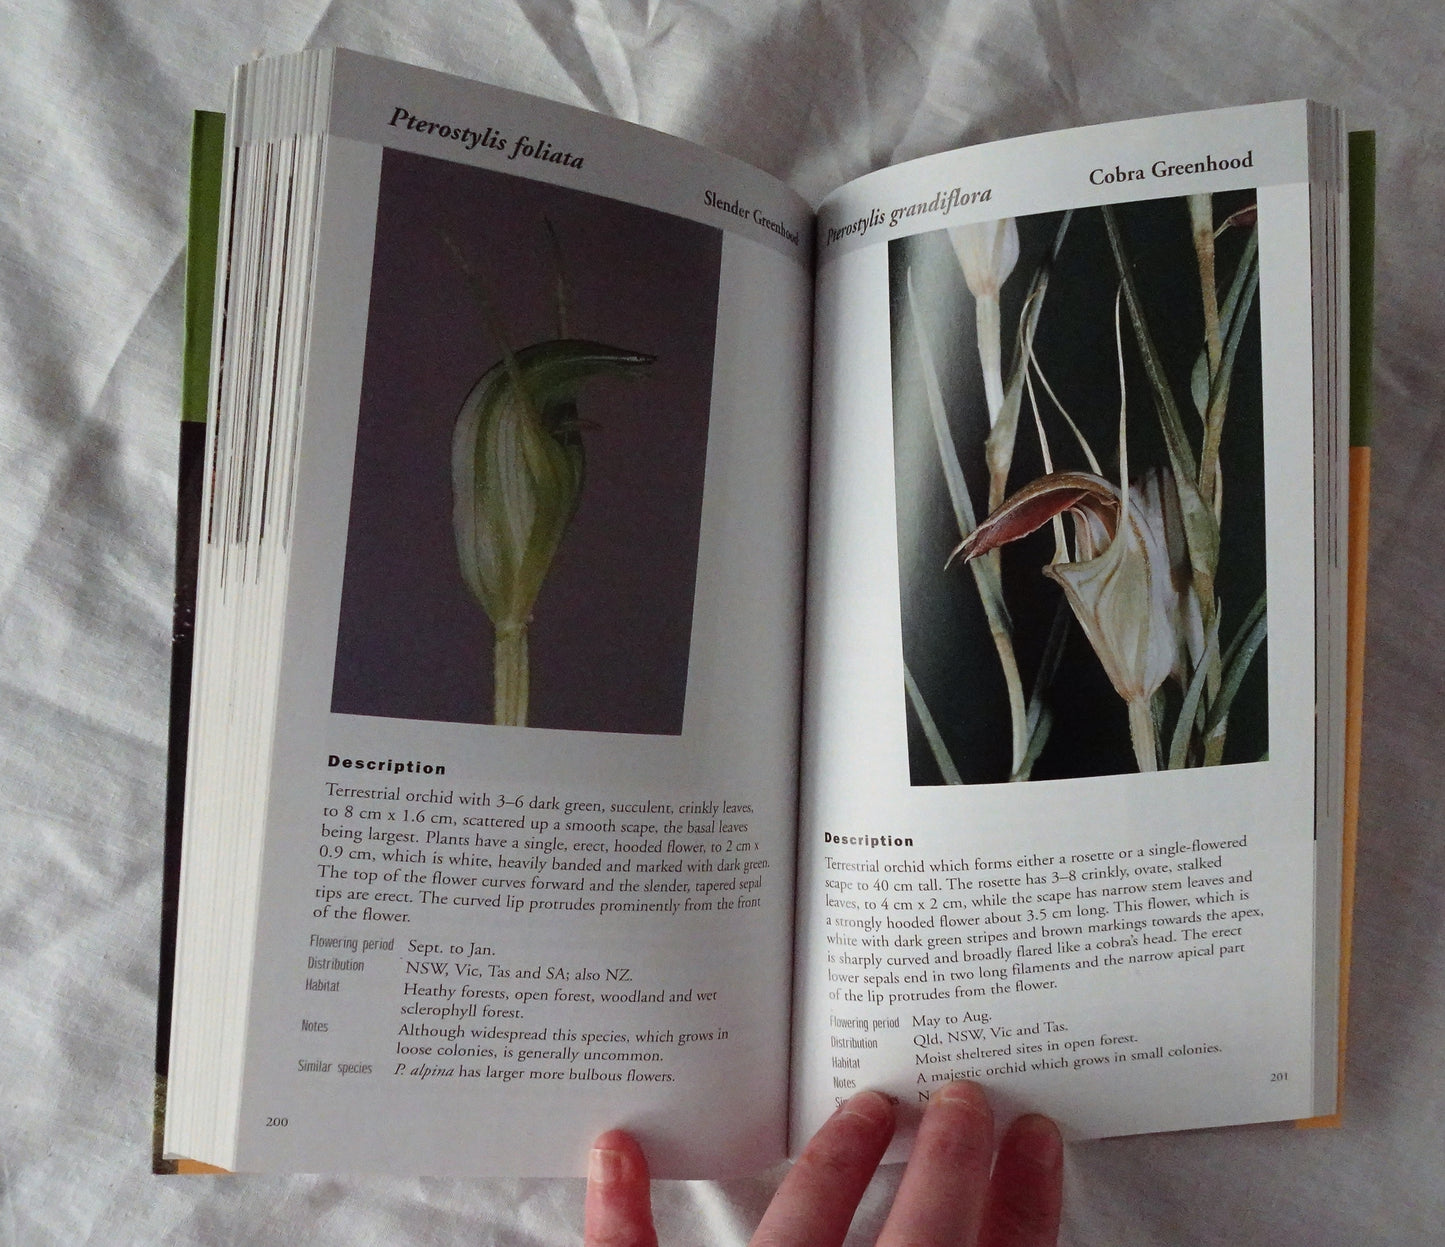 A Field Guide to the Native Orchids of Southern Australia by David and Barbara Jones